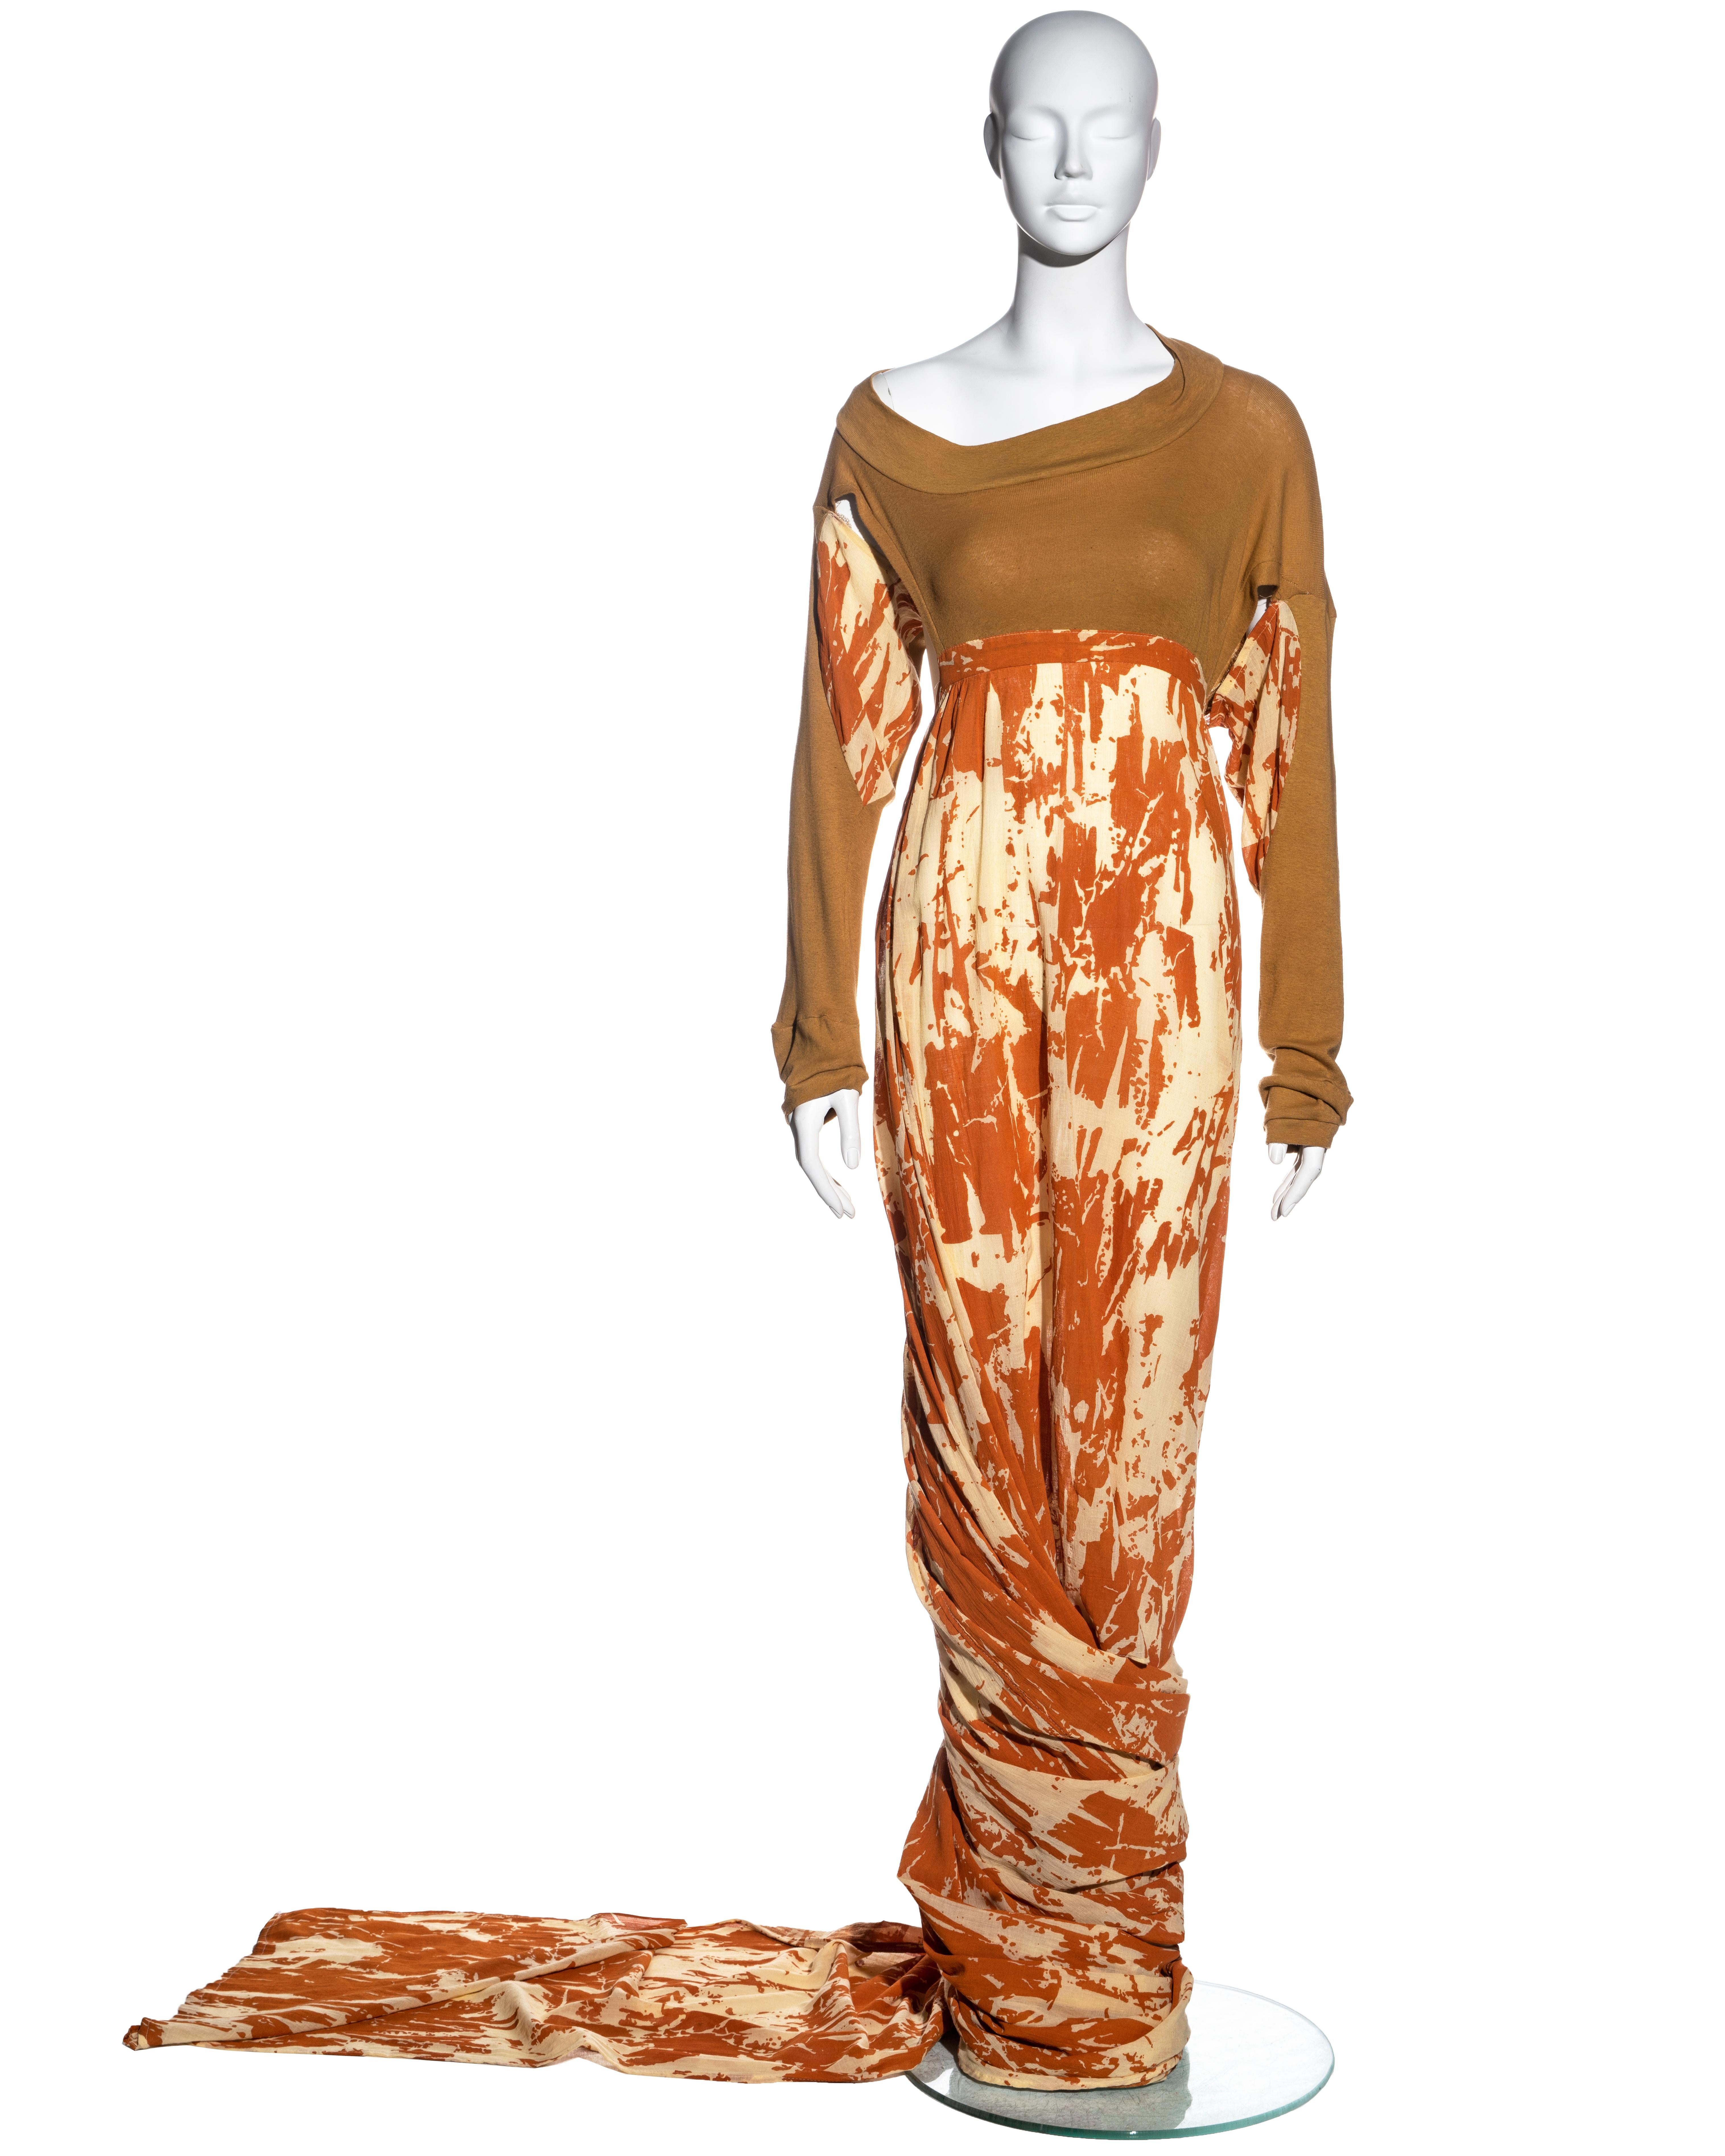 ▪ A rare Worlds End toga dress 
▪ Designed by Vivienne Westwood and Malcolm McLaren 
▪ Cotton-jersey bodice
▪ Open sides with ties to the waist 
▪ Asymmetric sleeves 
▪ Cream and orange printed floor-length skirt with long train which can be styled